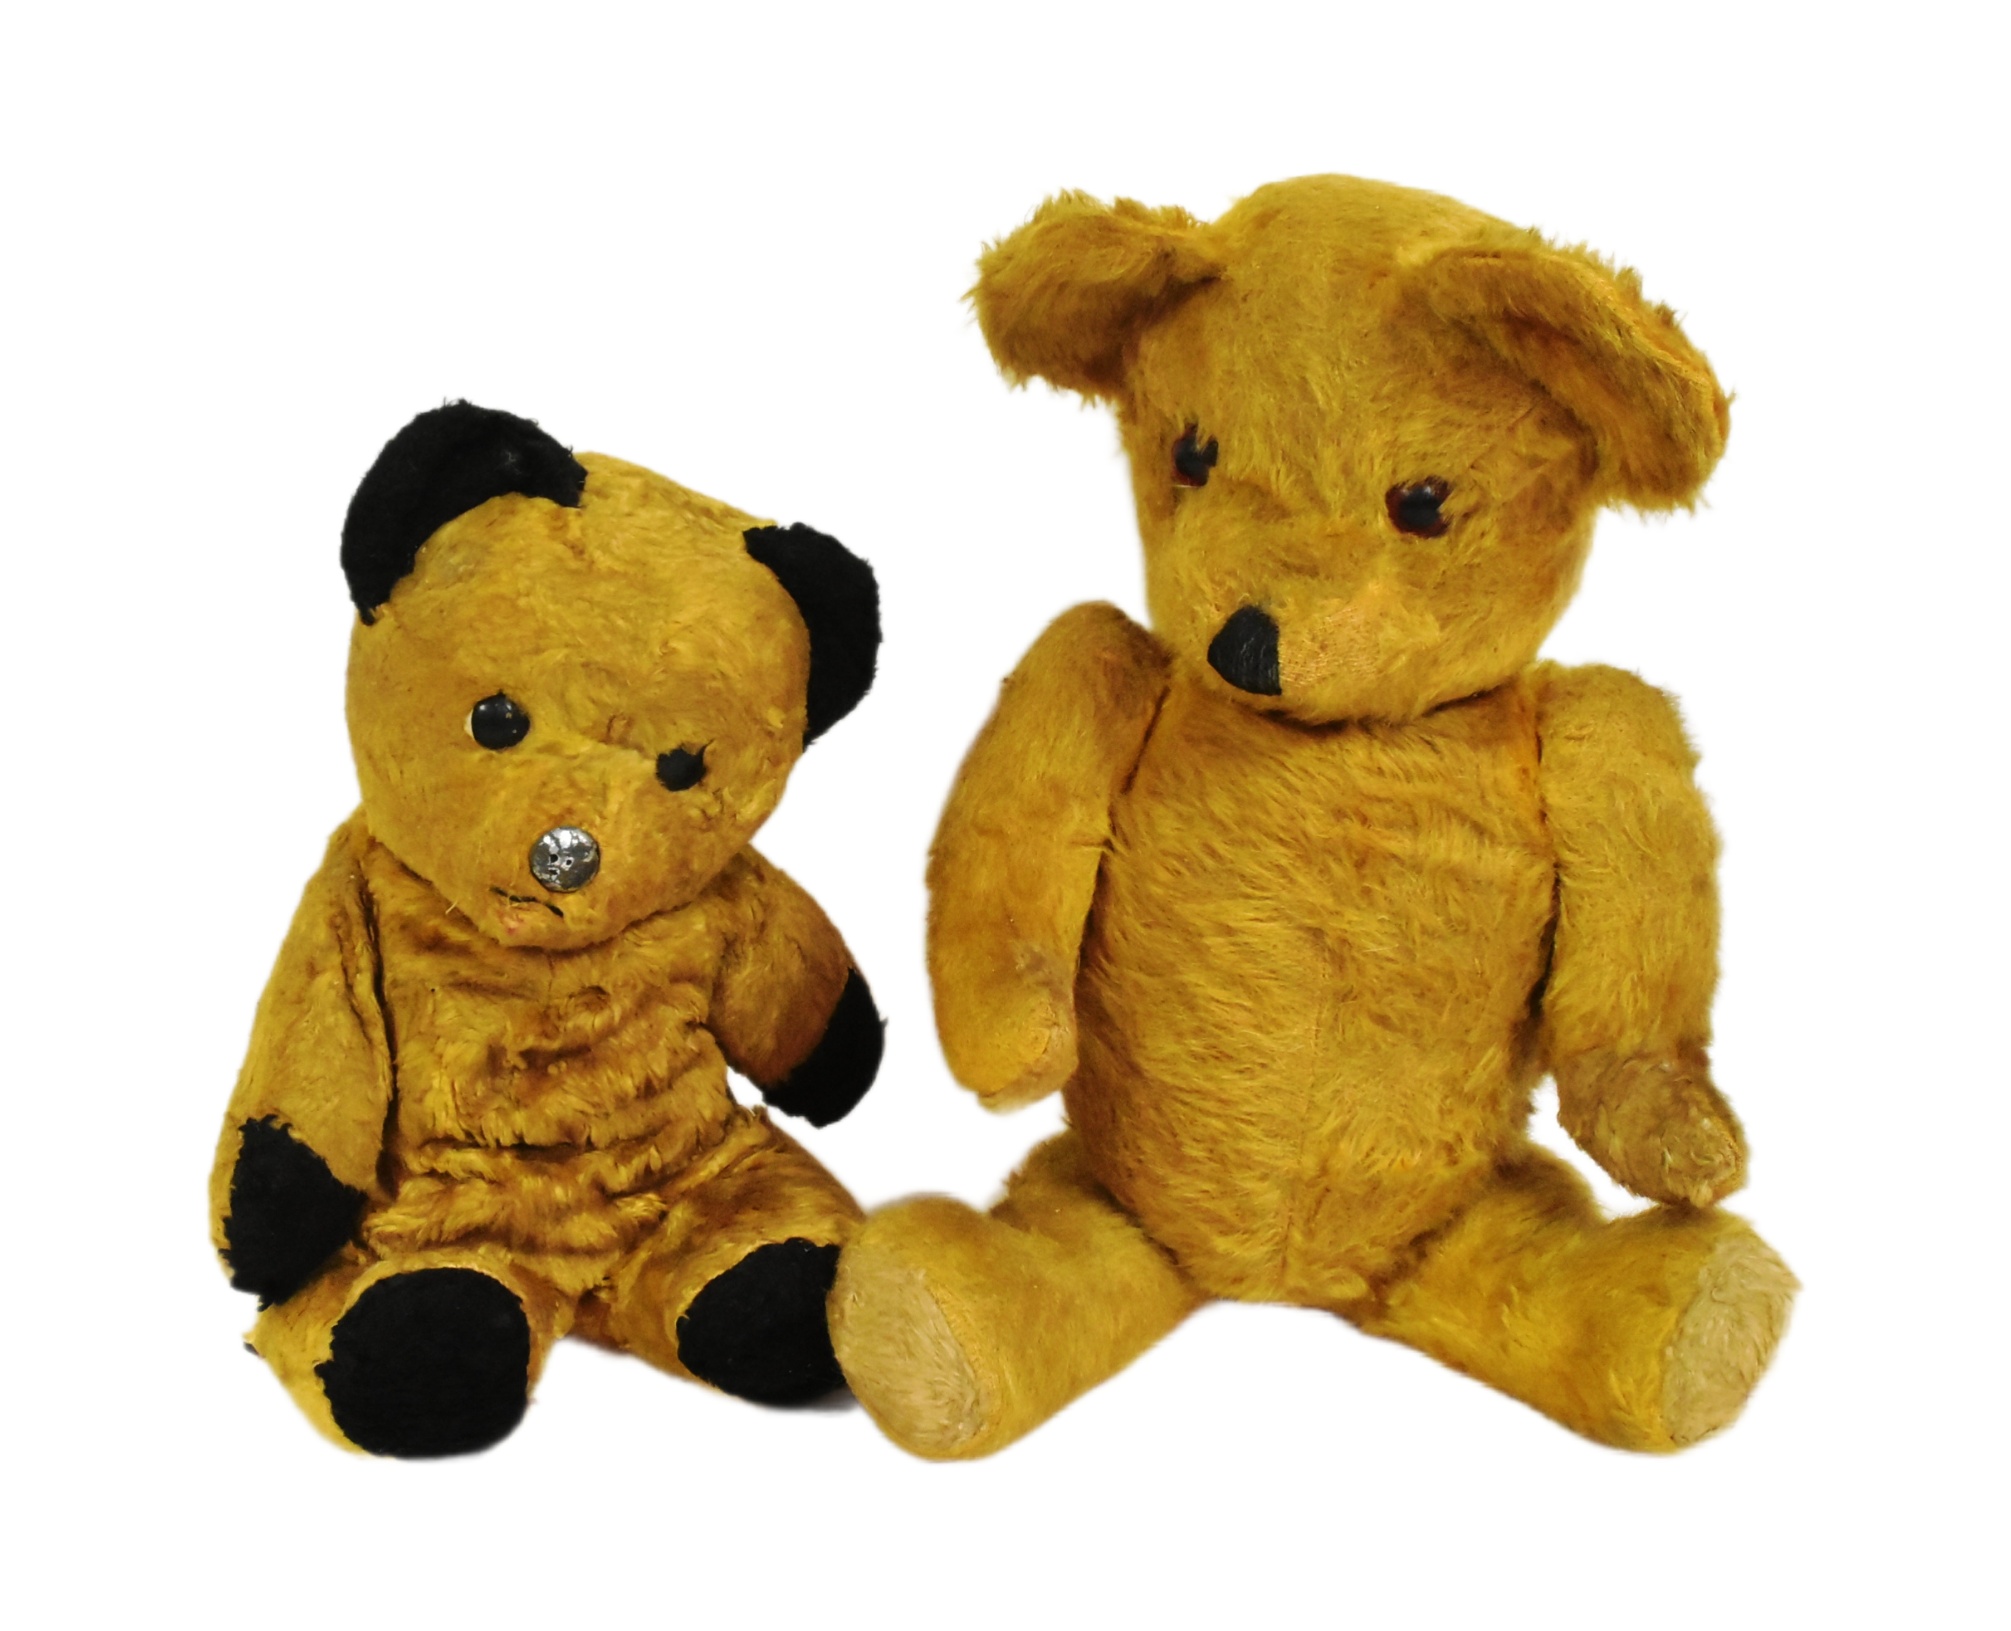 TWO VINTAGE SOFT TOY TEDDY BEARS